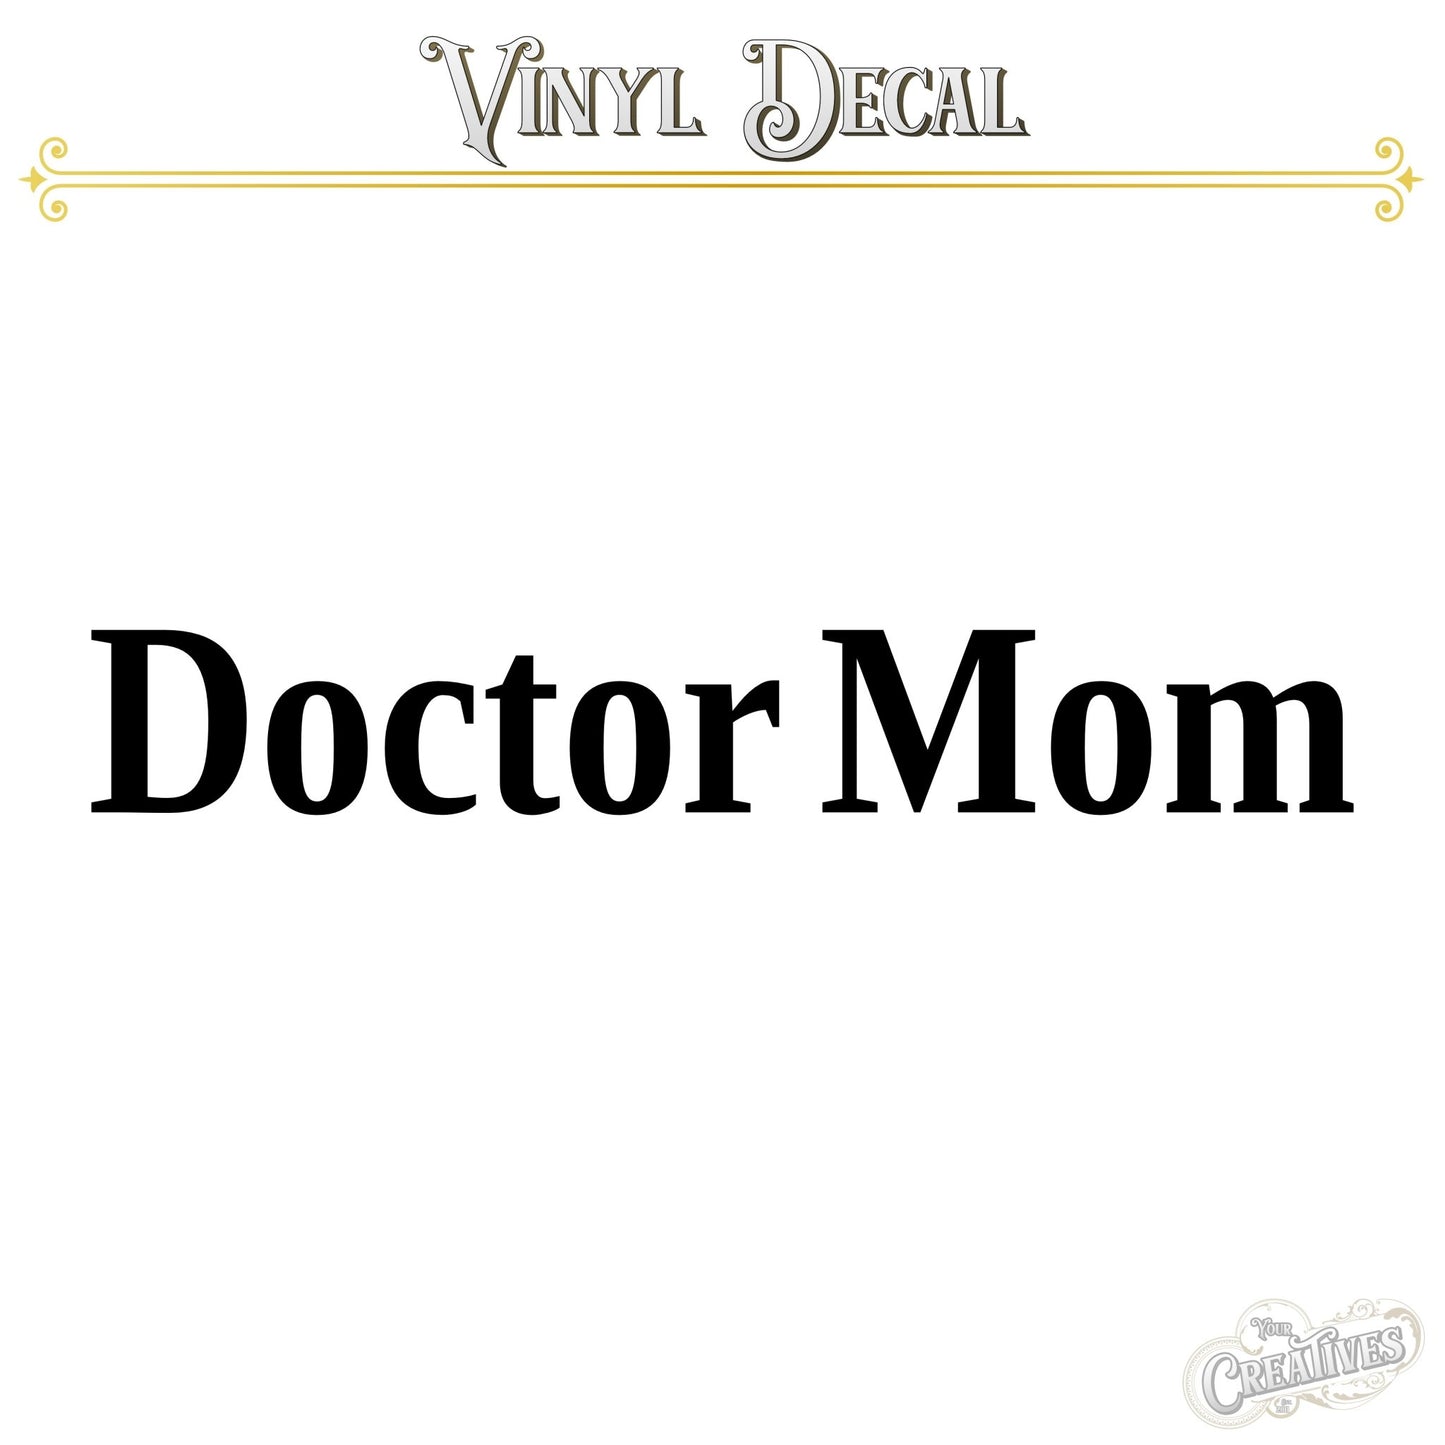 Doctor Mom Vinyl Decal - Your Creatives Inc